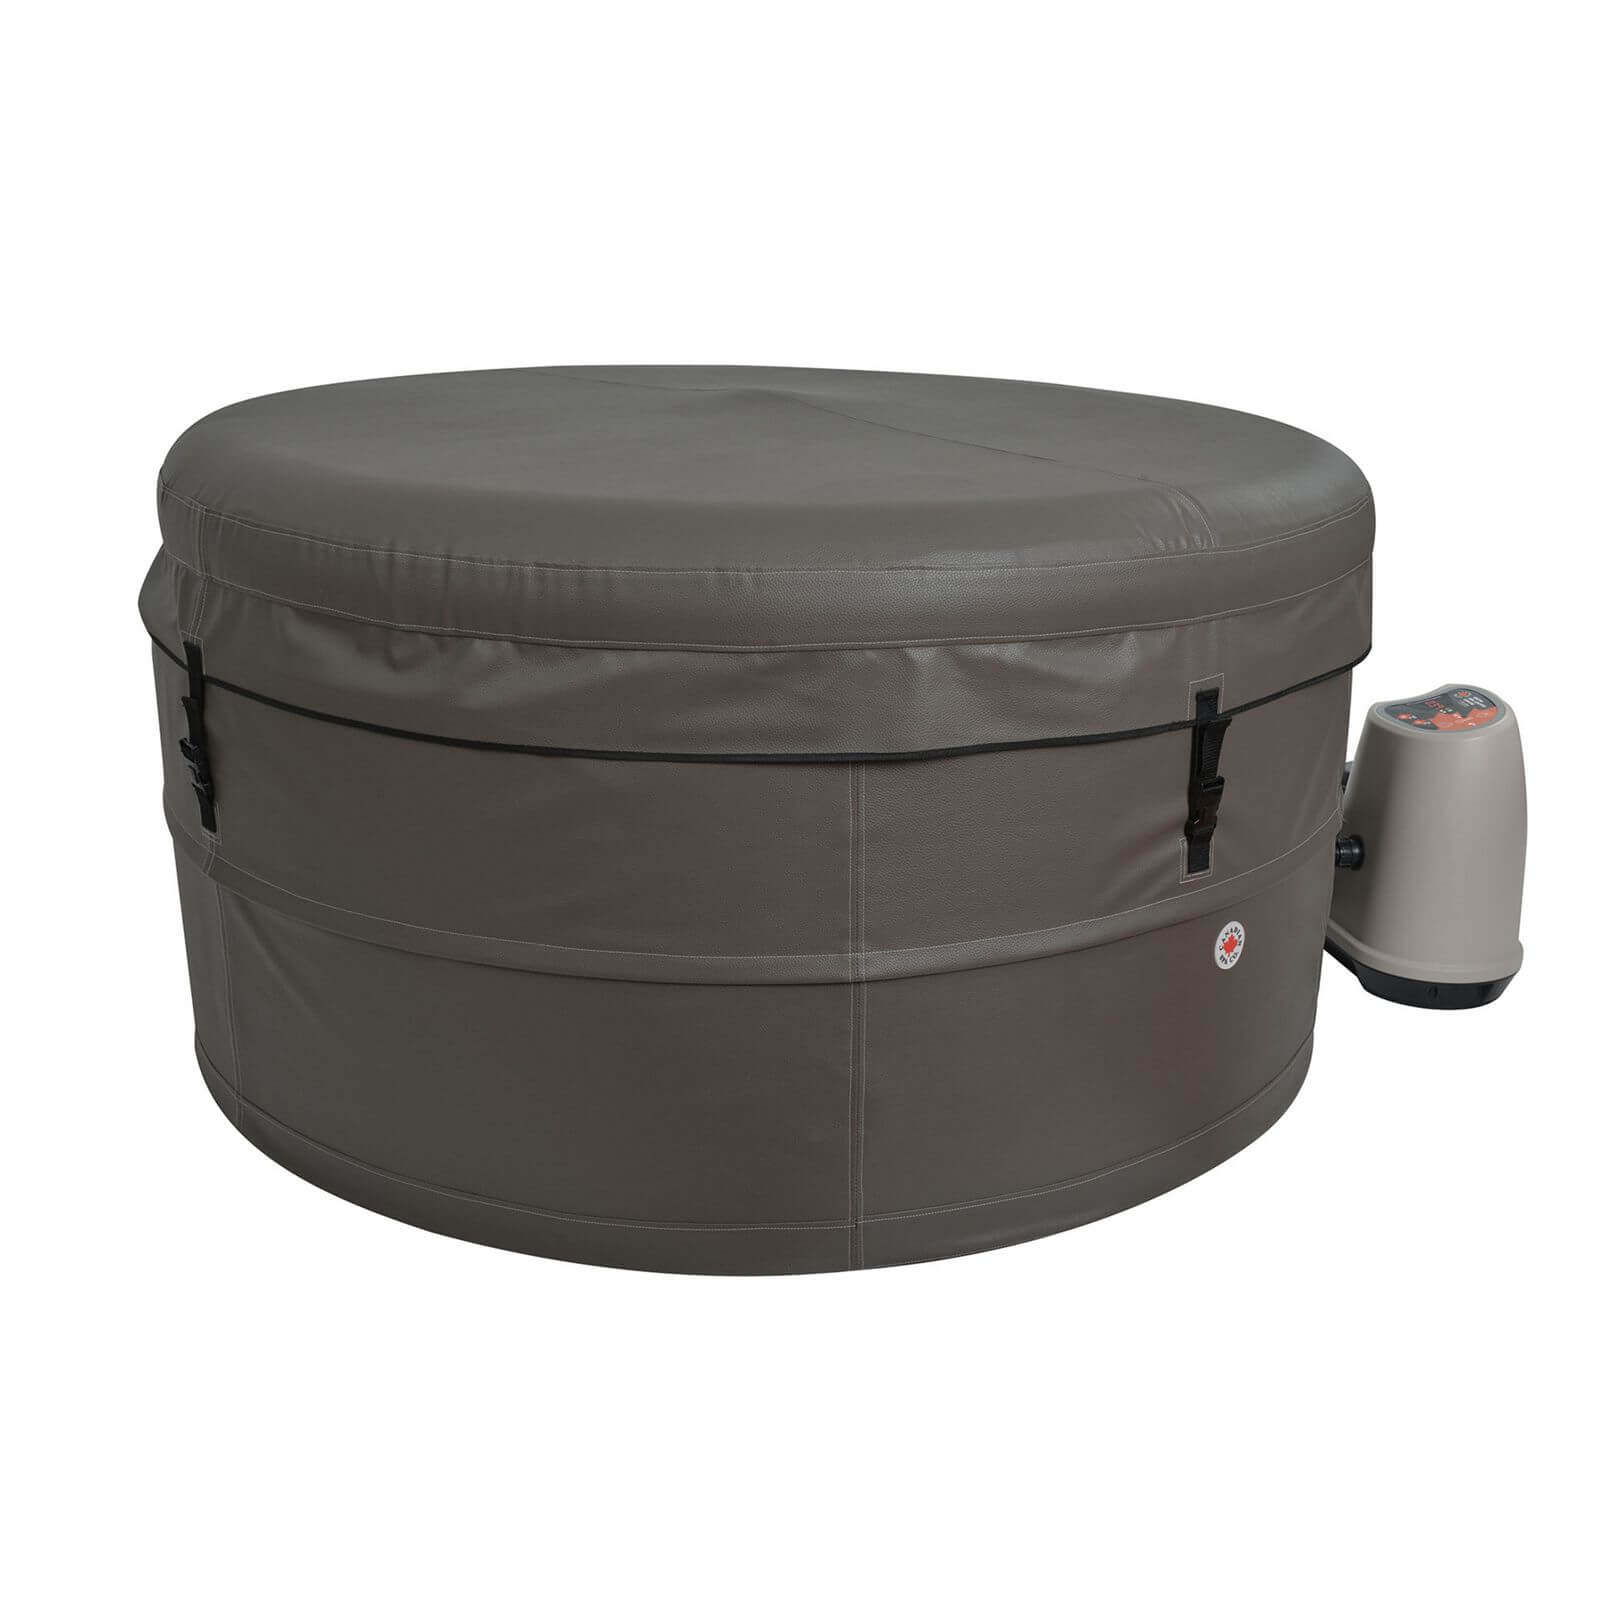 Swift Current 4-6 Hot Tub Version 2 by Canadian Spa (Includes Free Delivery)